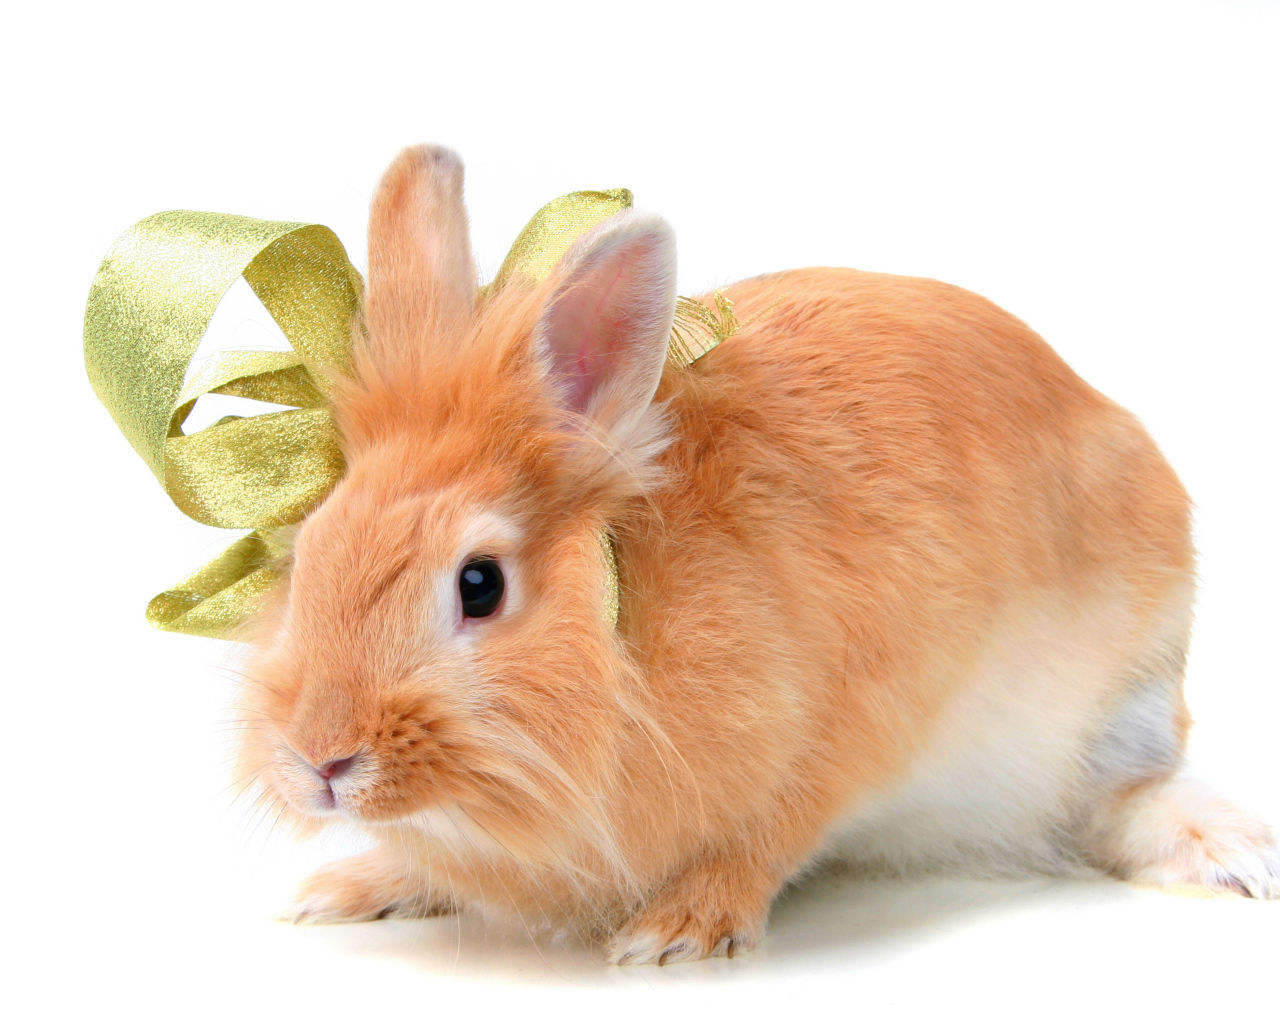 Red fluffy decorative rabbit in a bow on a white background